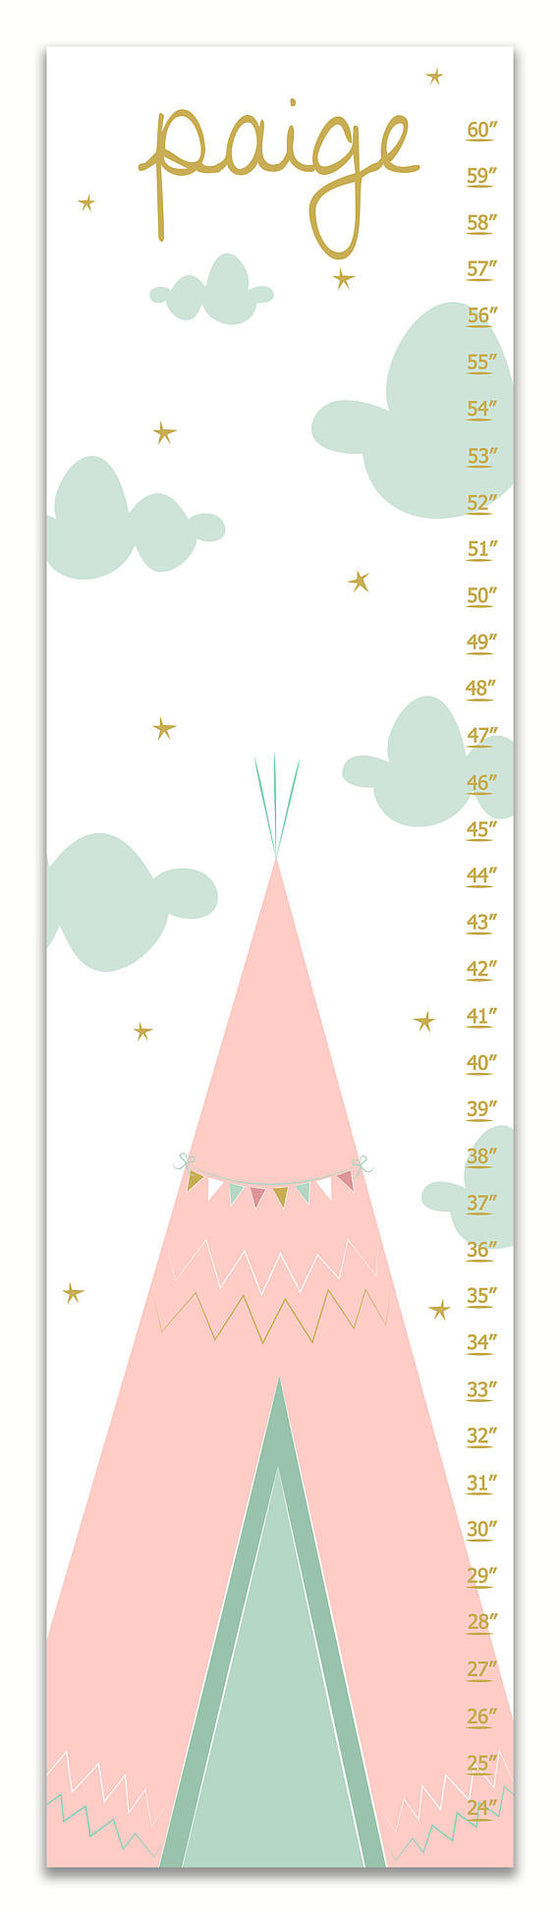 Teepee Personalized Growth Chart - Pink & Mint - Nursery Decor